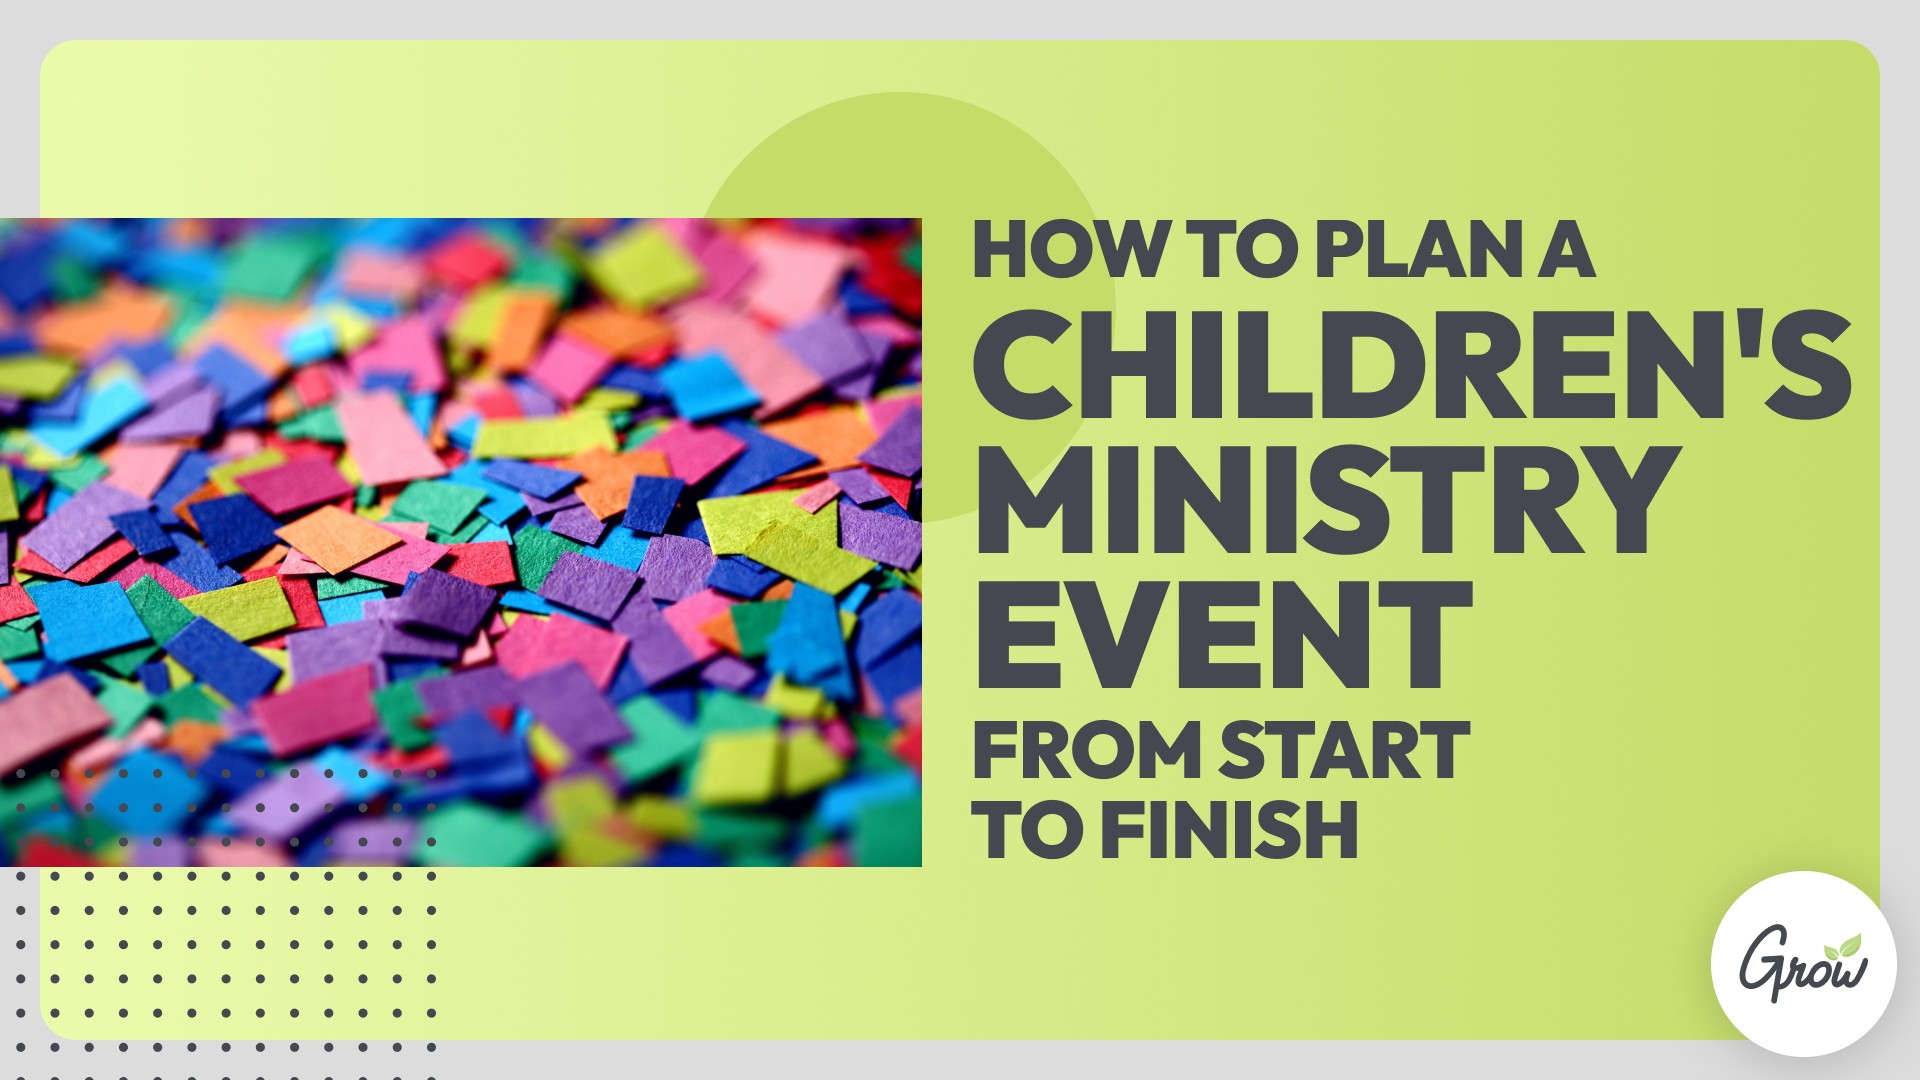 How to Plan a Children's Ministry Event from Start to Finish